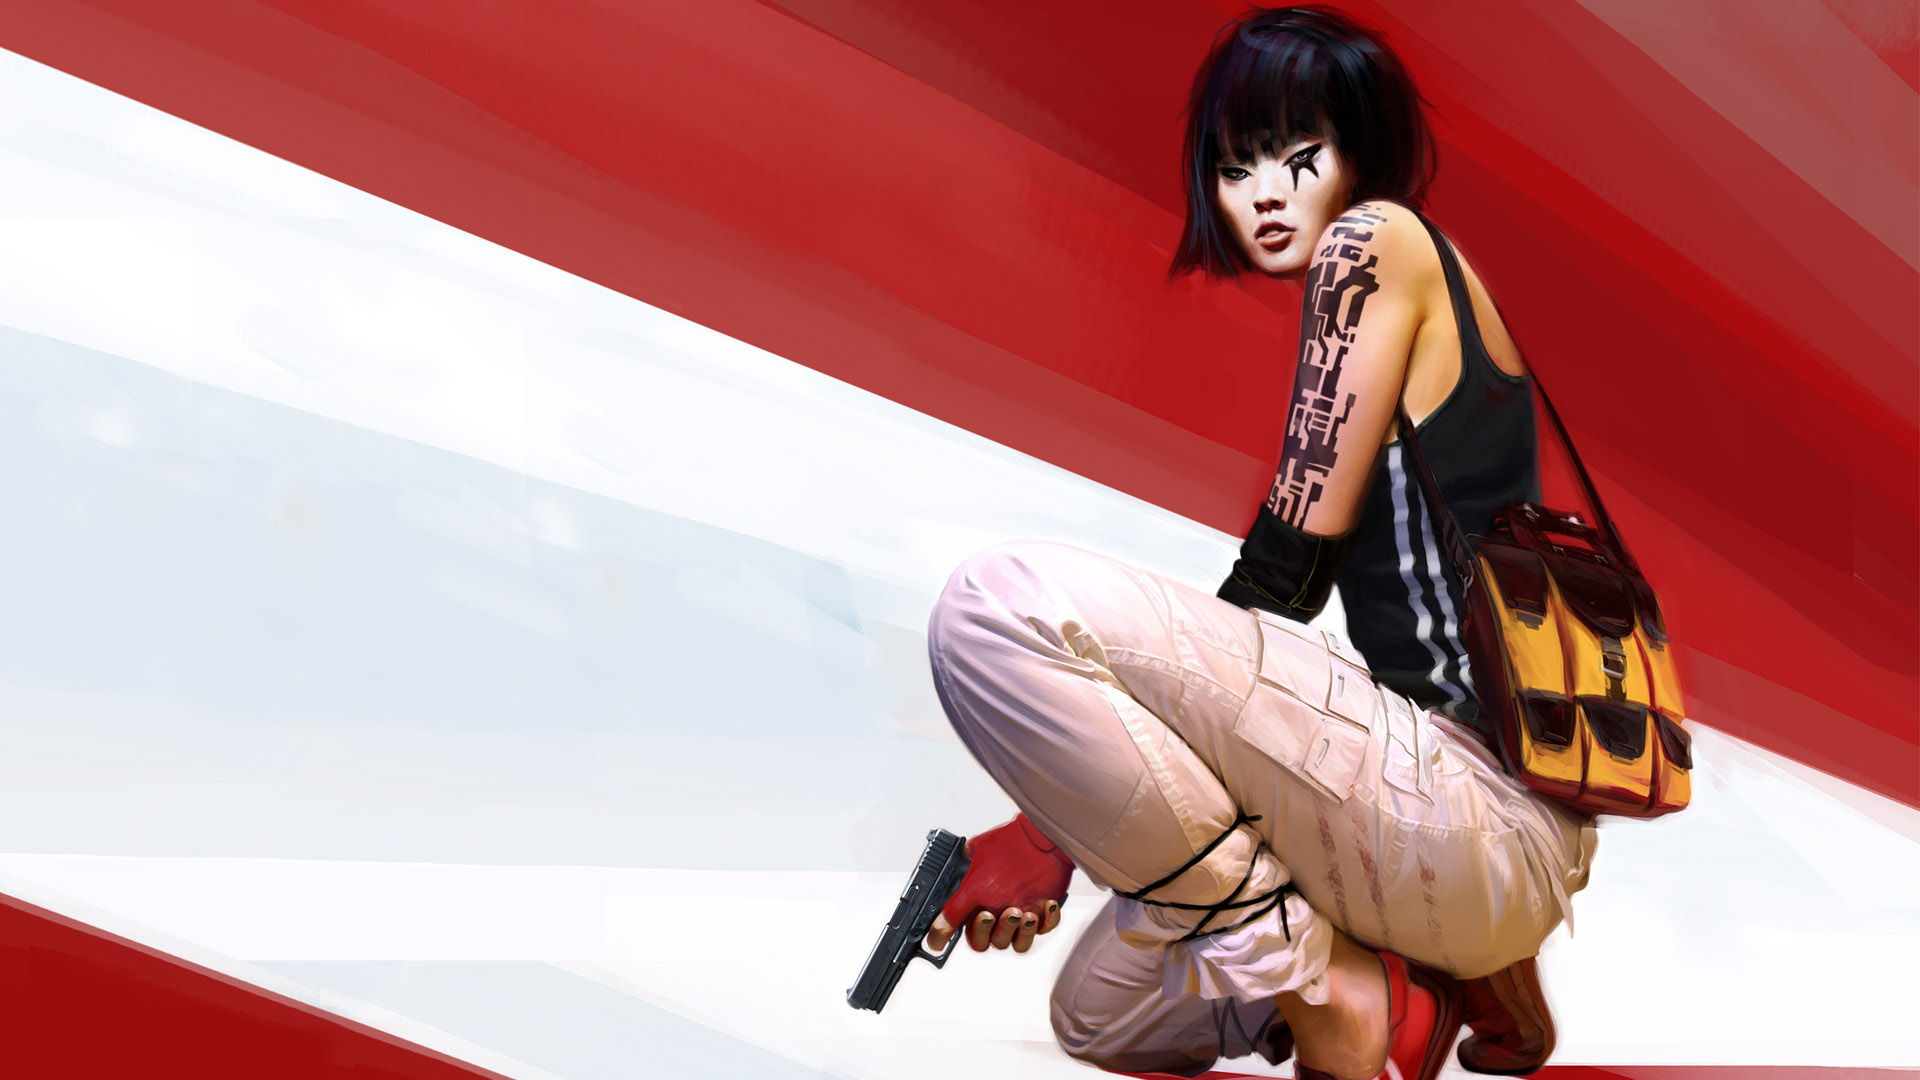 Mirror's Edge artwork for your fapping delight – Destructoid